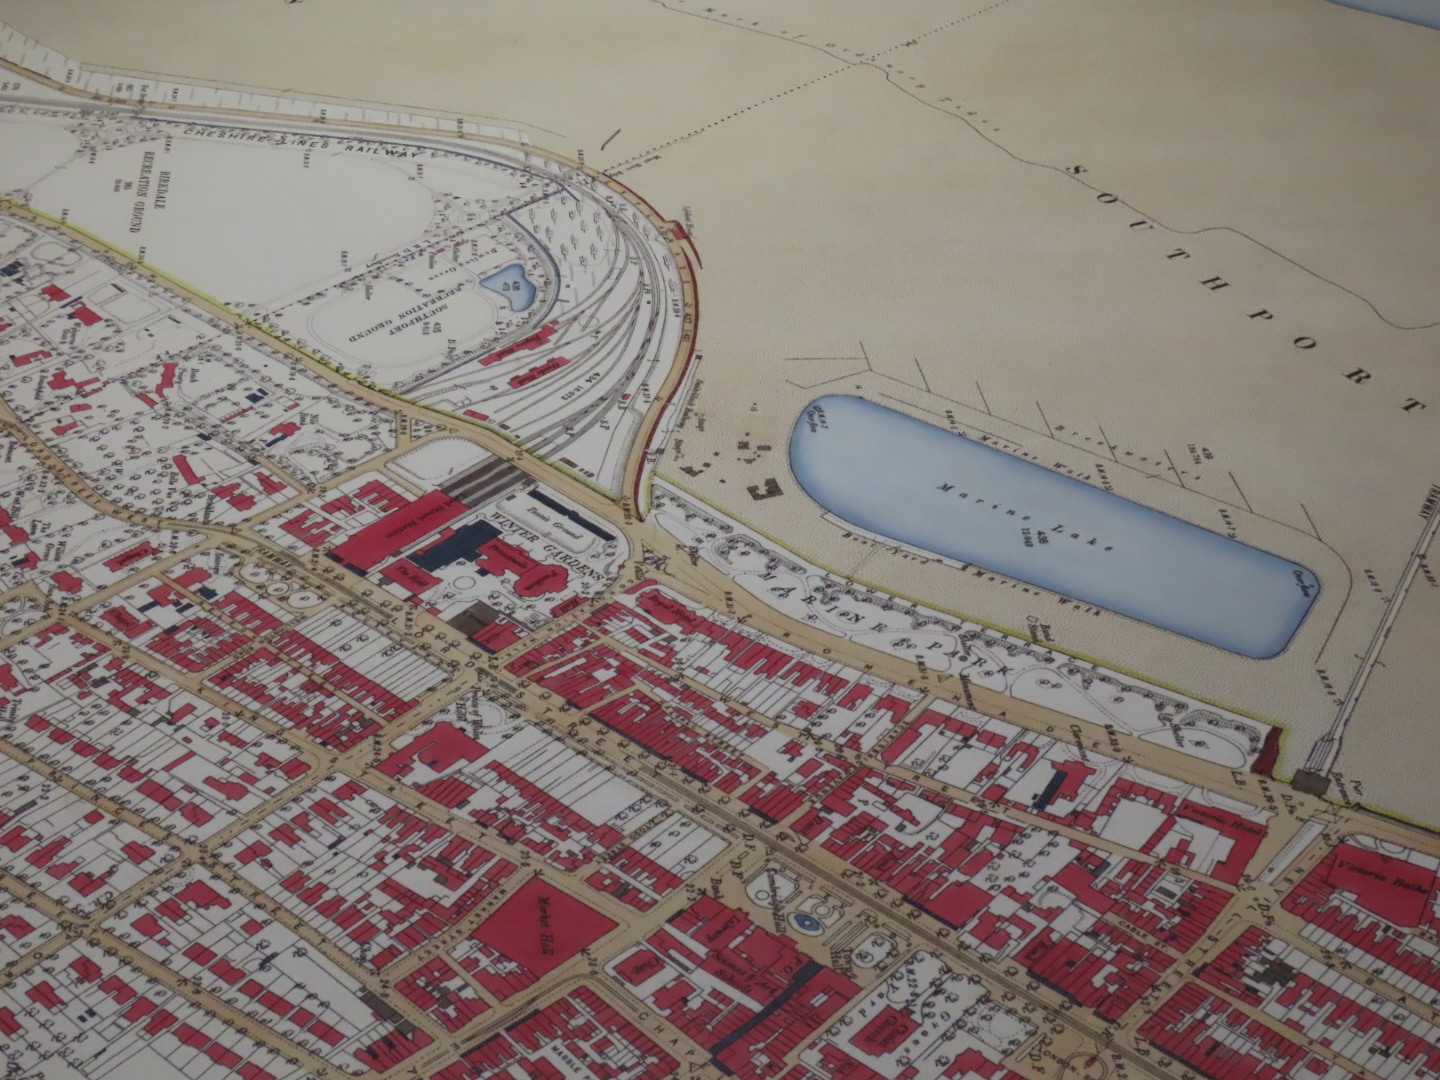 The exhibition Built on Sand 200 years of Southport's changing street scene is at The Atkinson on Lord Street in Southport from Saturday, June 18th 2022 to September 2022. An old map of Southport features in the exhibition